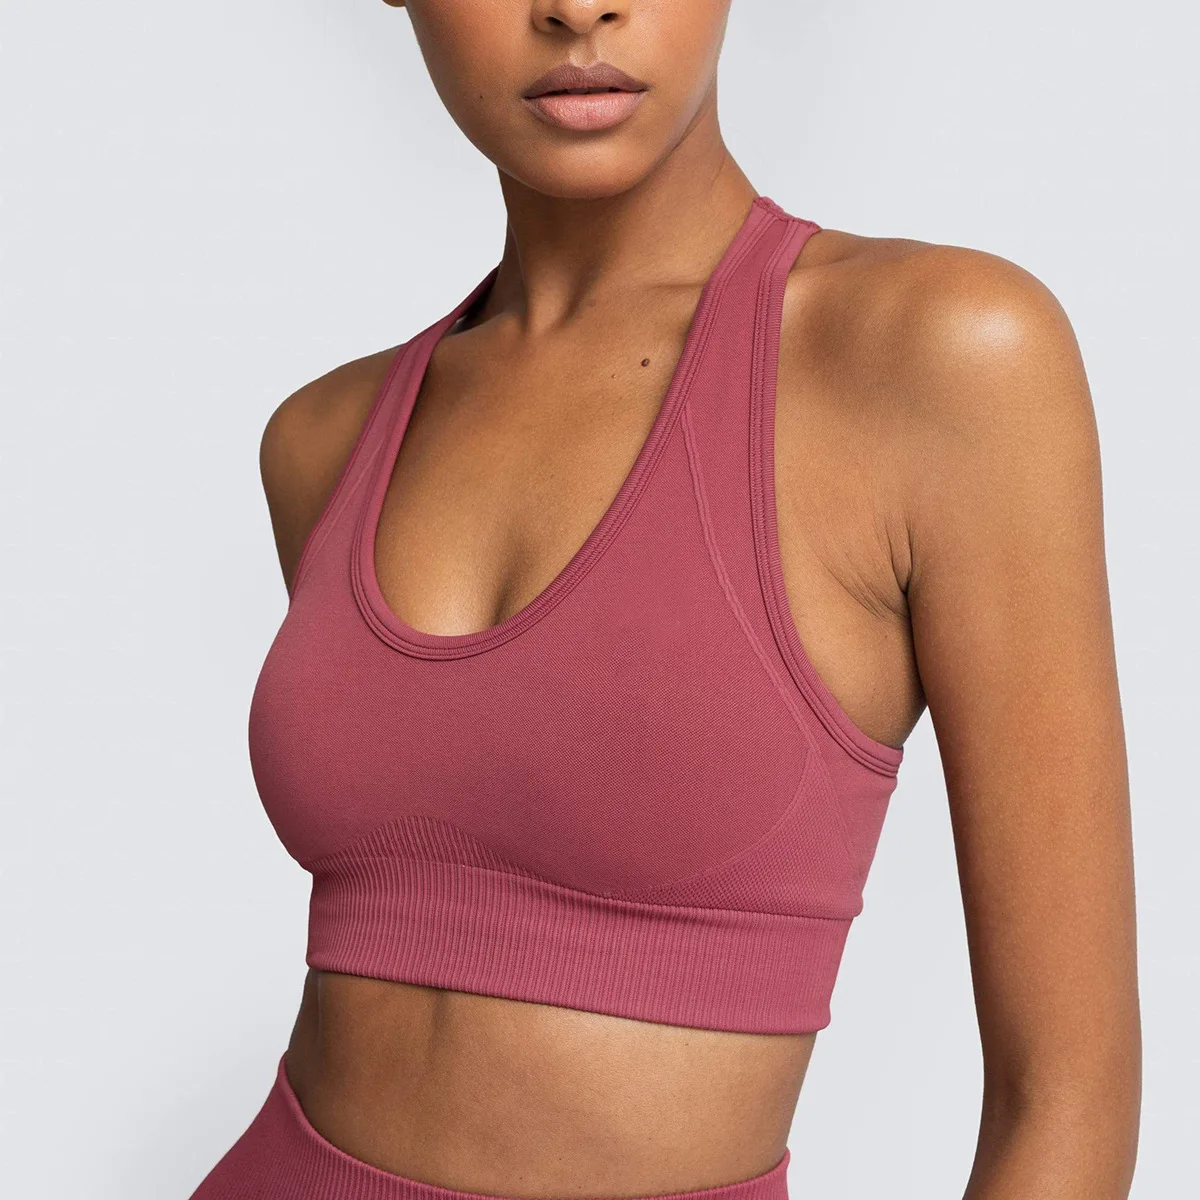 Wholesale Custom Super Soft Breathable Gather Stereotypes Thin Cup Bras Women Sport Yoga Bra Top